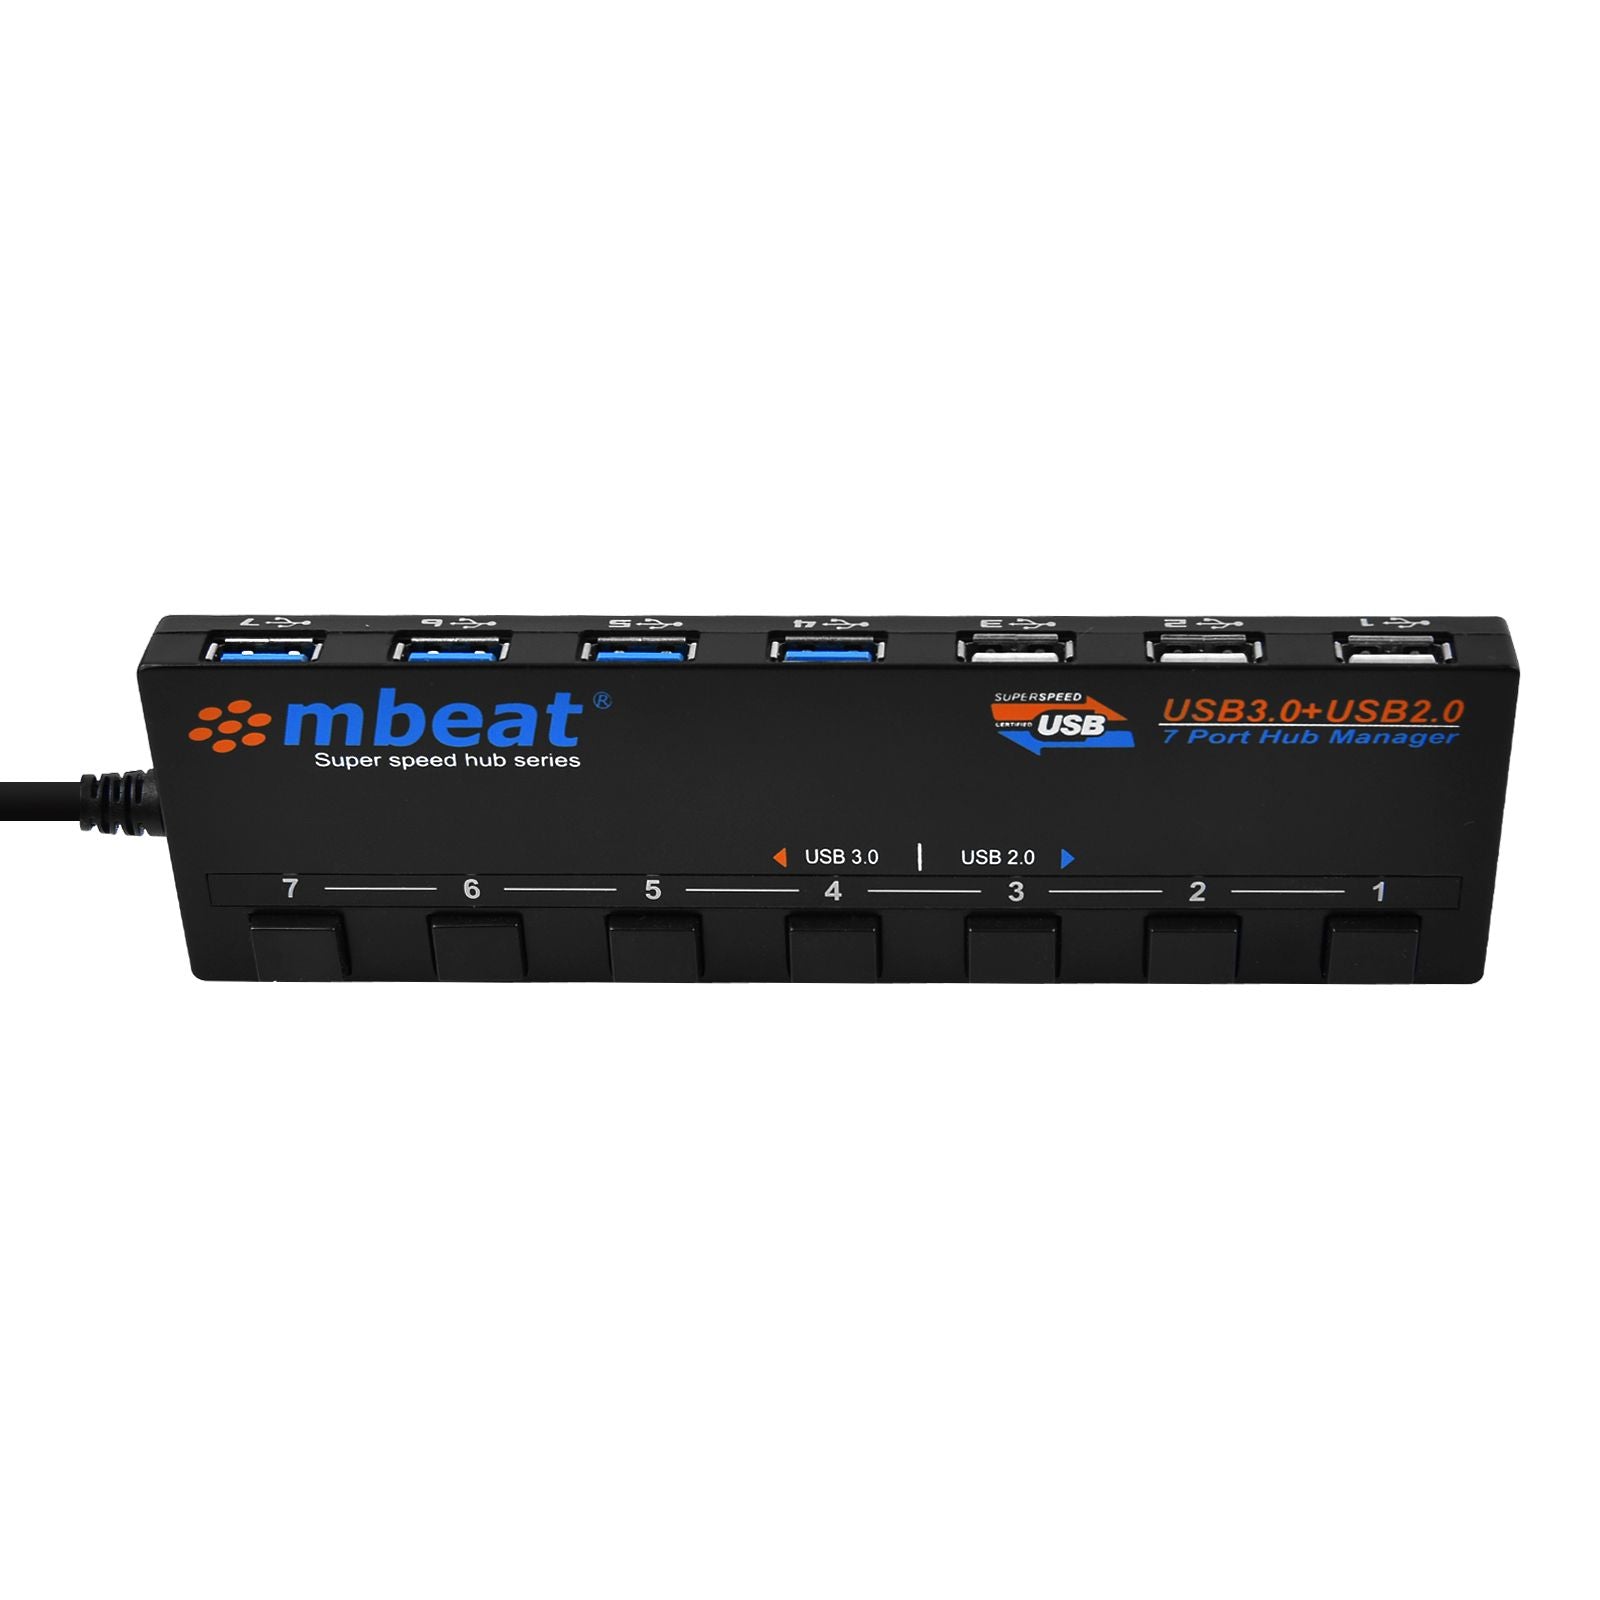 mbeat 7-Port USB 3.0 and USB 2.0 Hub Manager With Switches